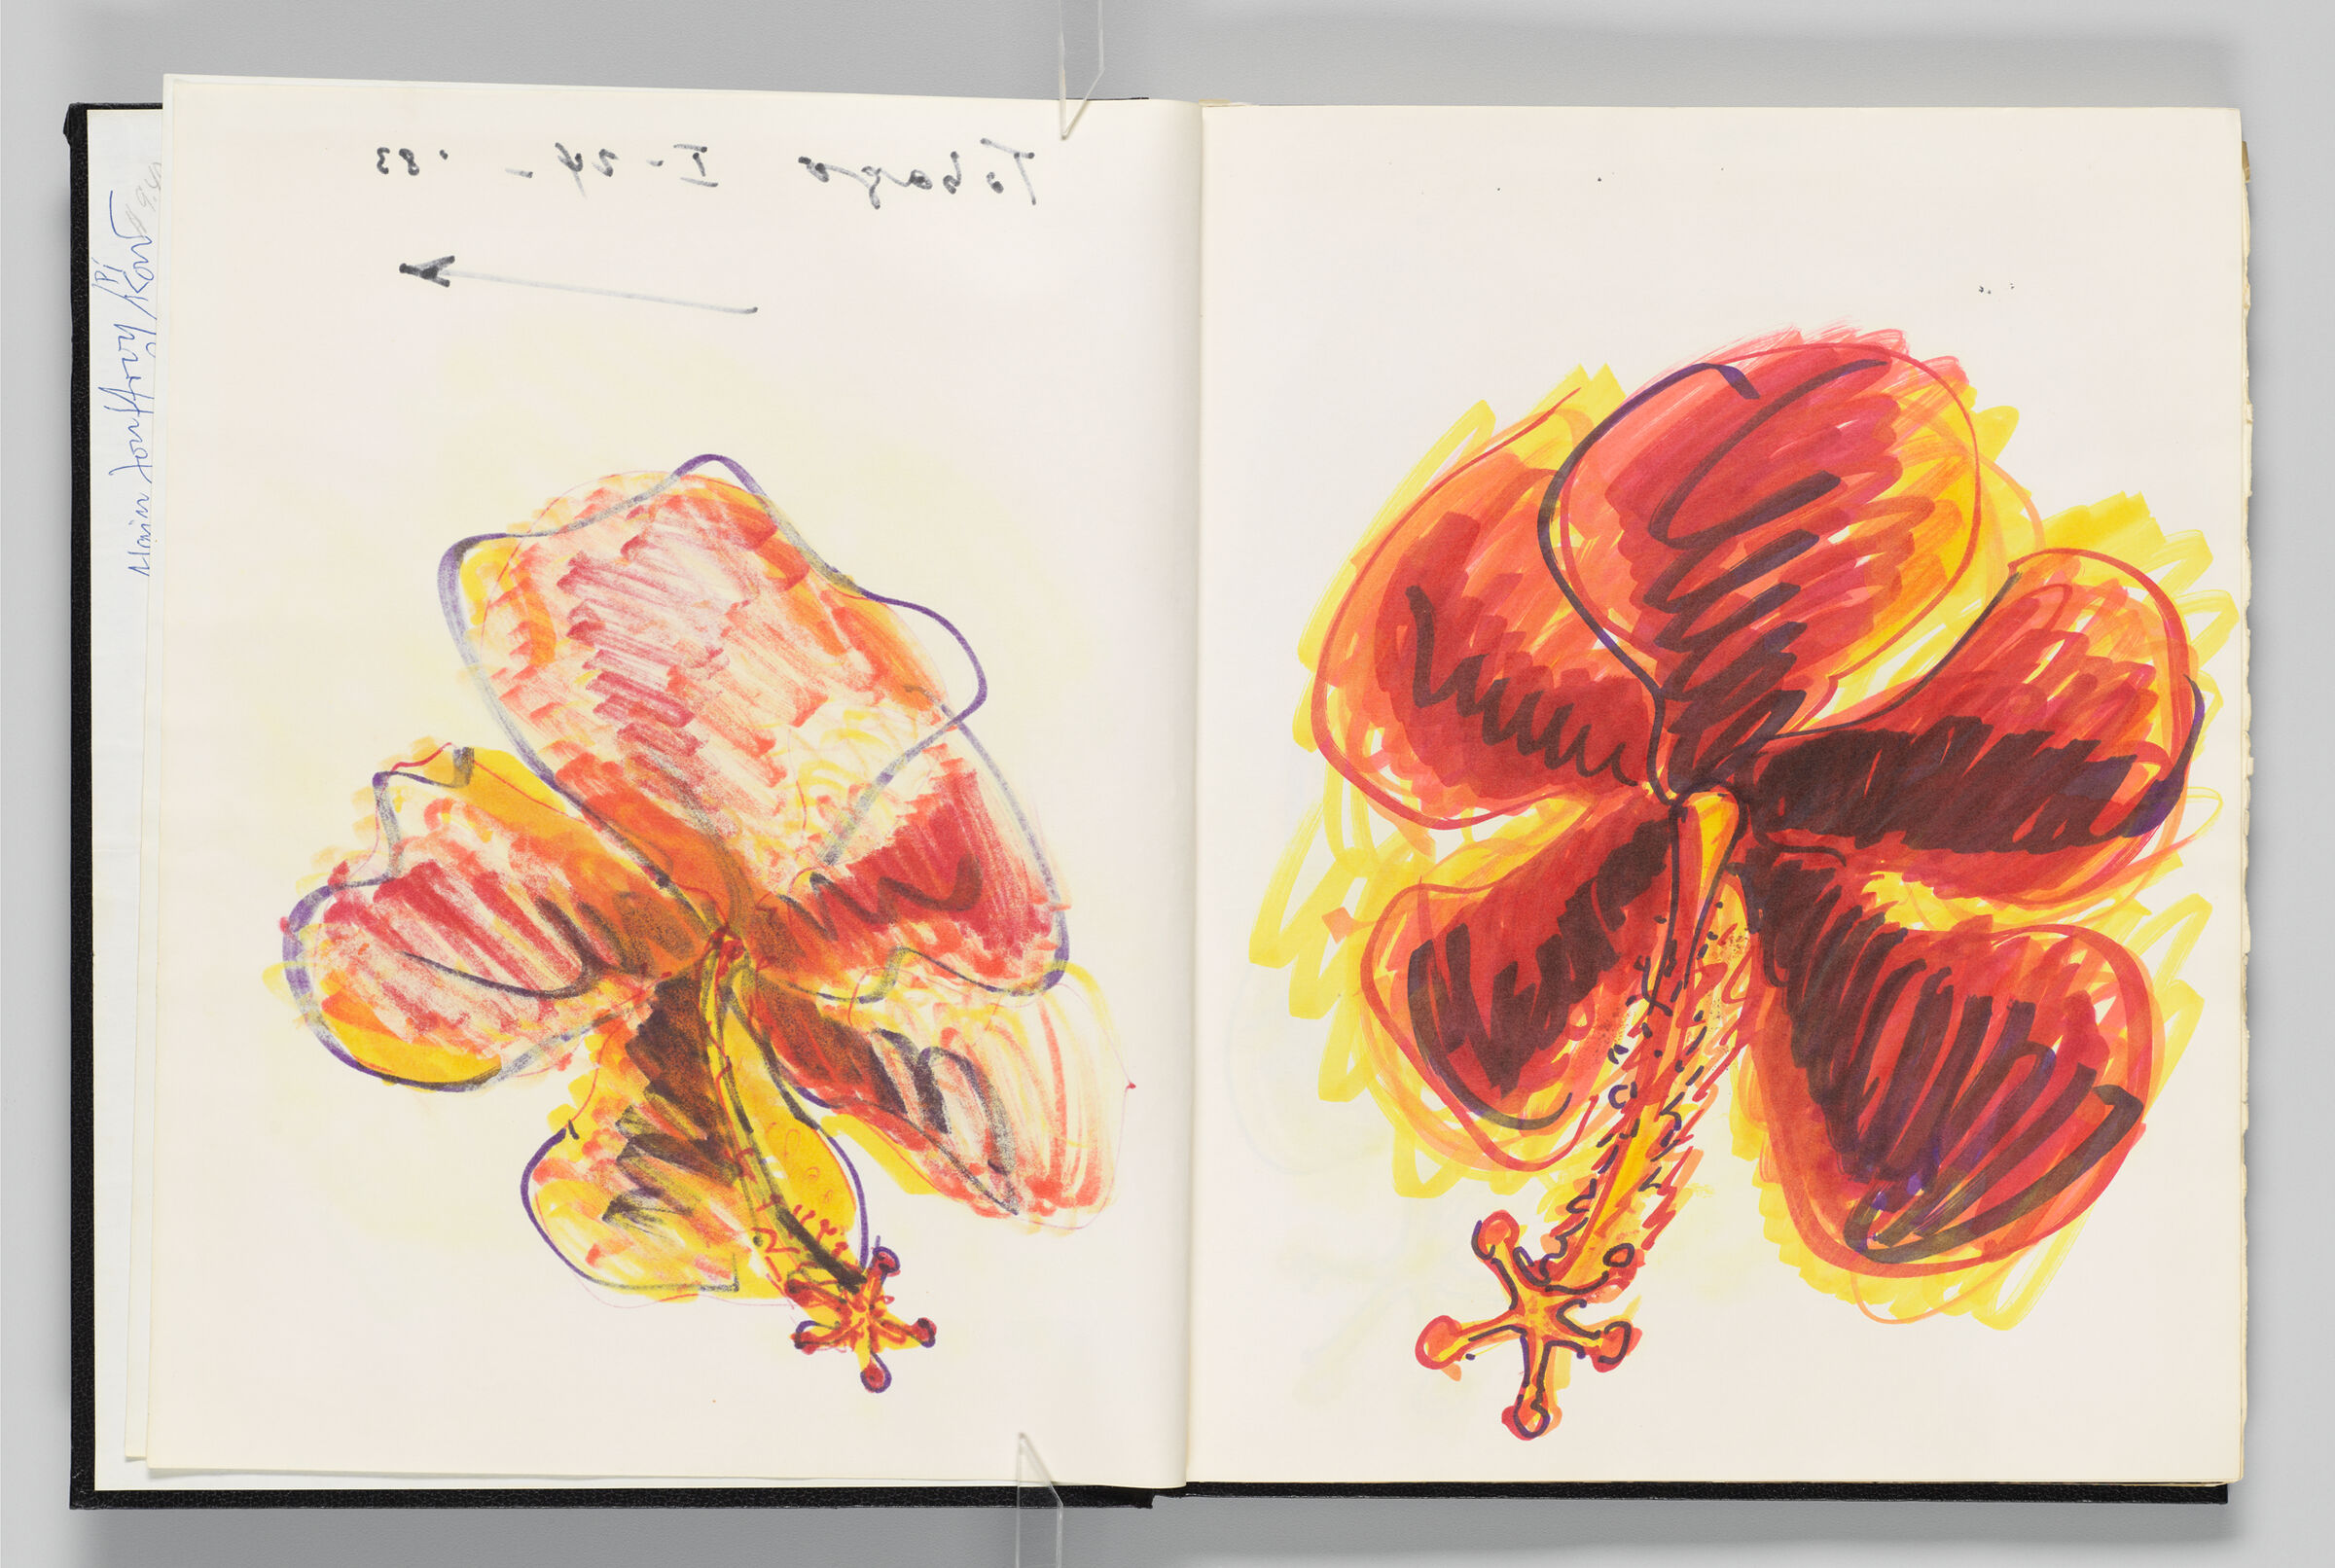 Untitled (Bleed-Through Of Previous Page, Left Page); Untitled (Hibiscus, Right Page)